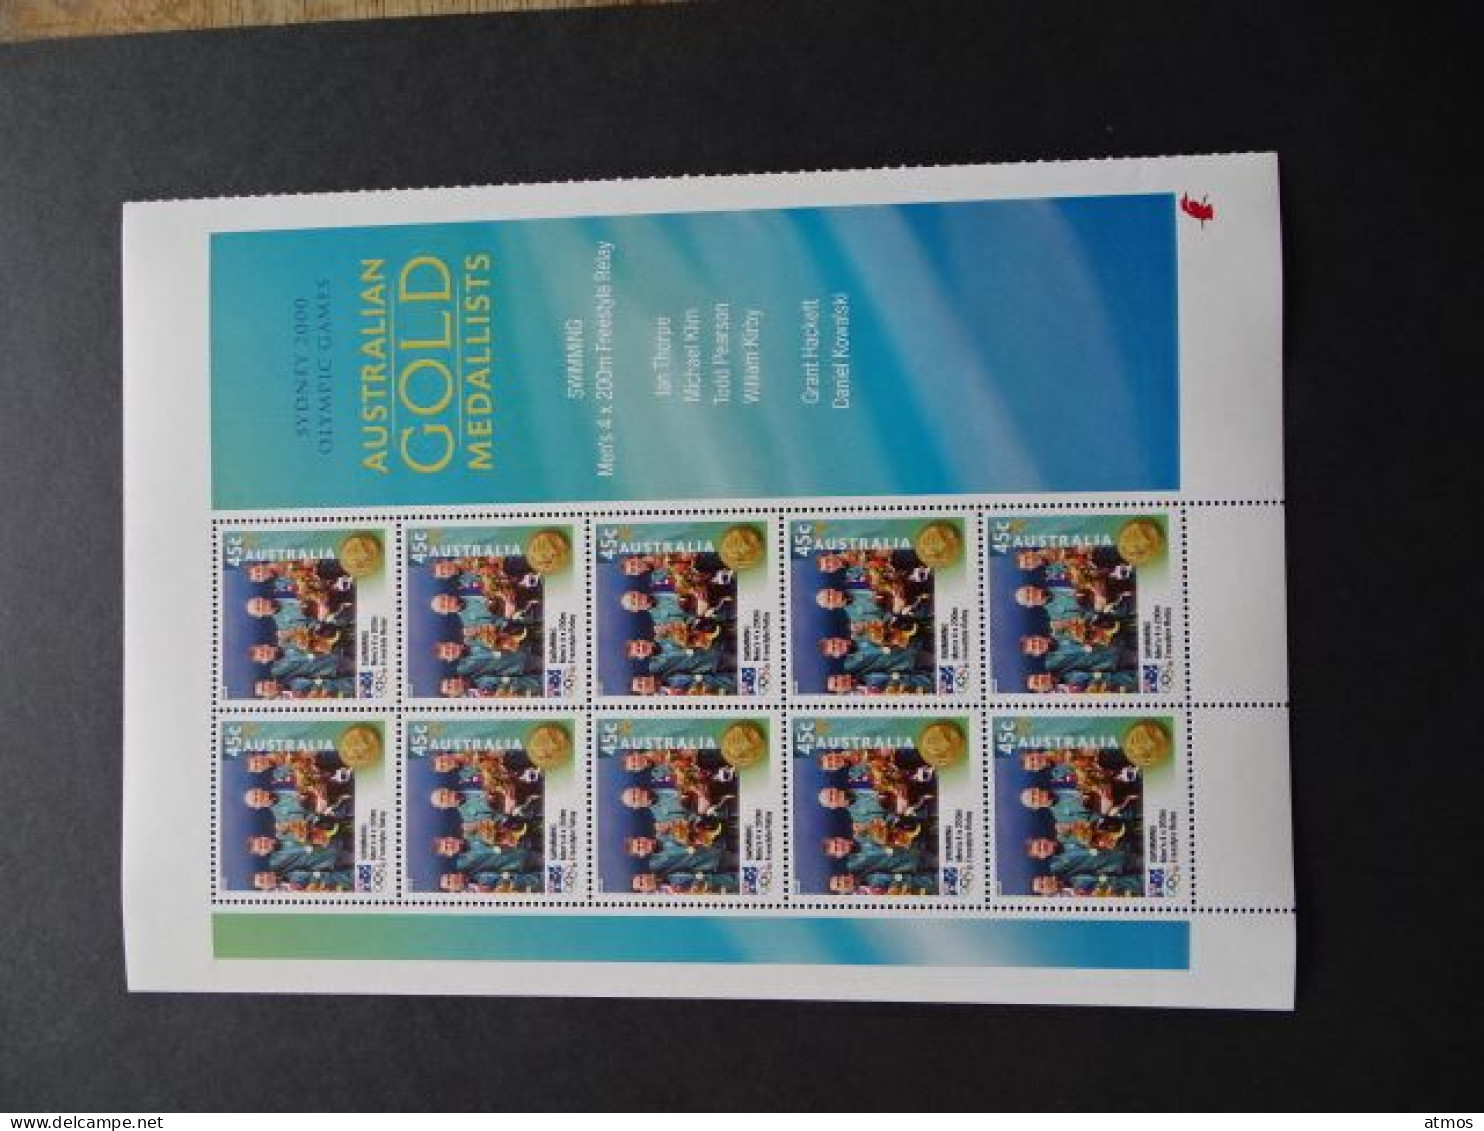 Australia MNH Michel Nr 1978 Sheet Of 10 From 2000 ACT - Neufs